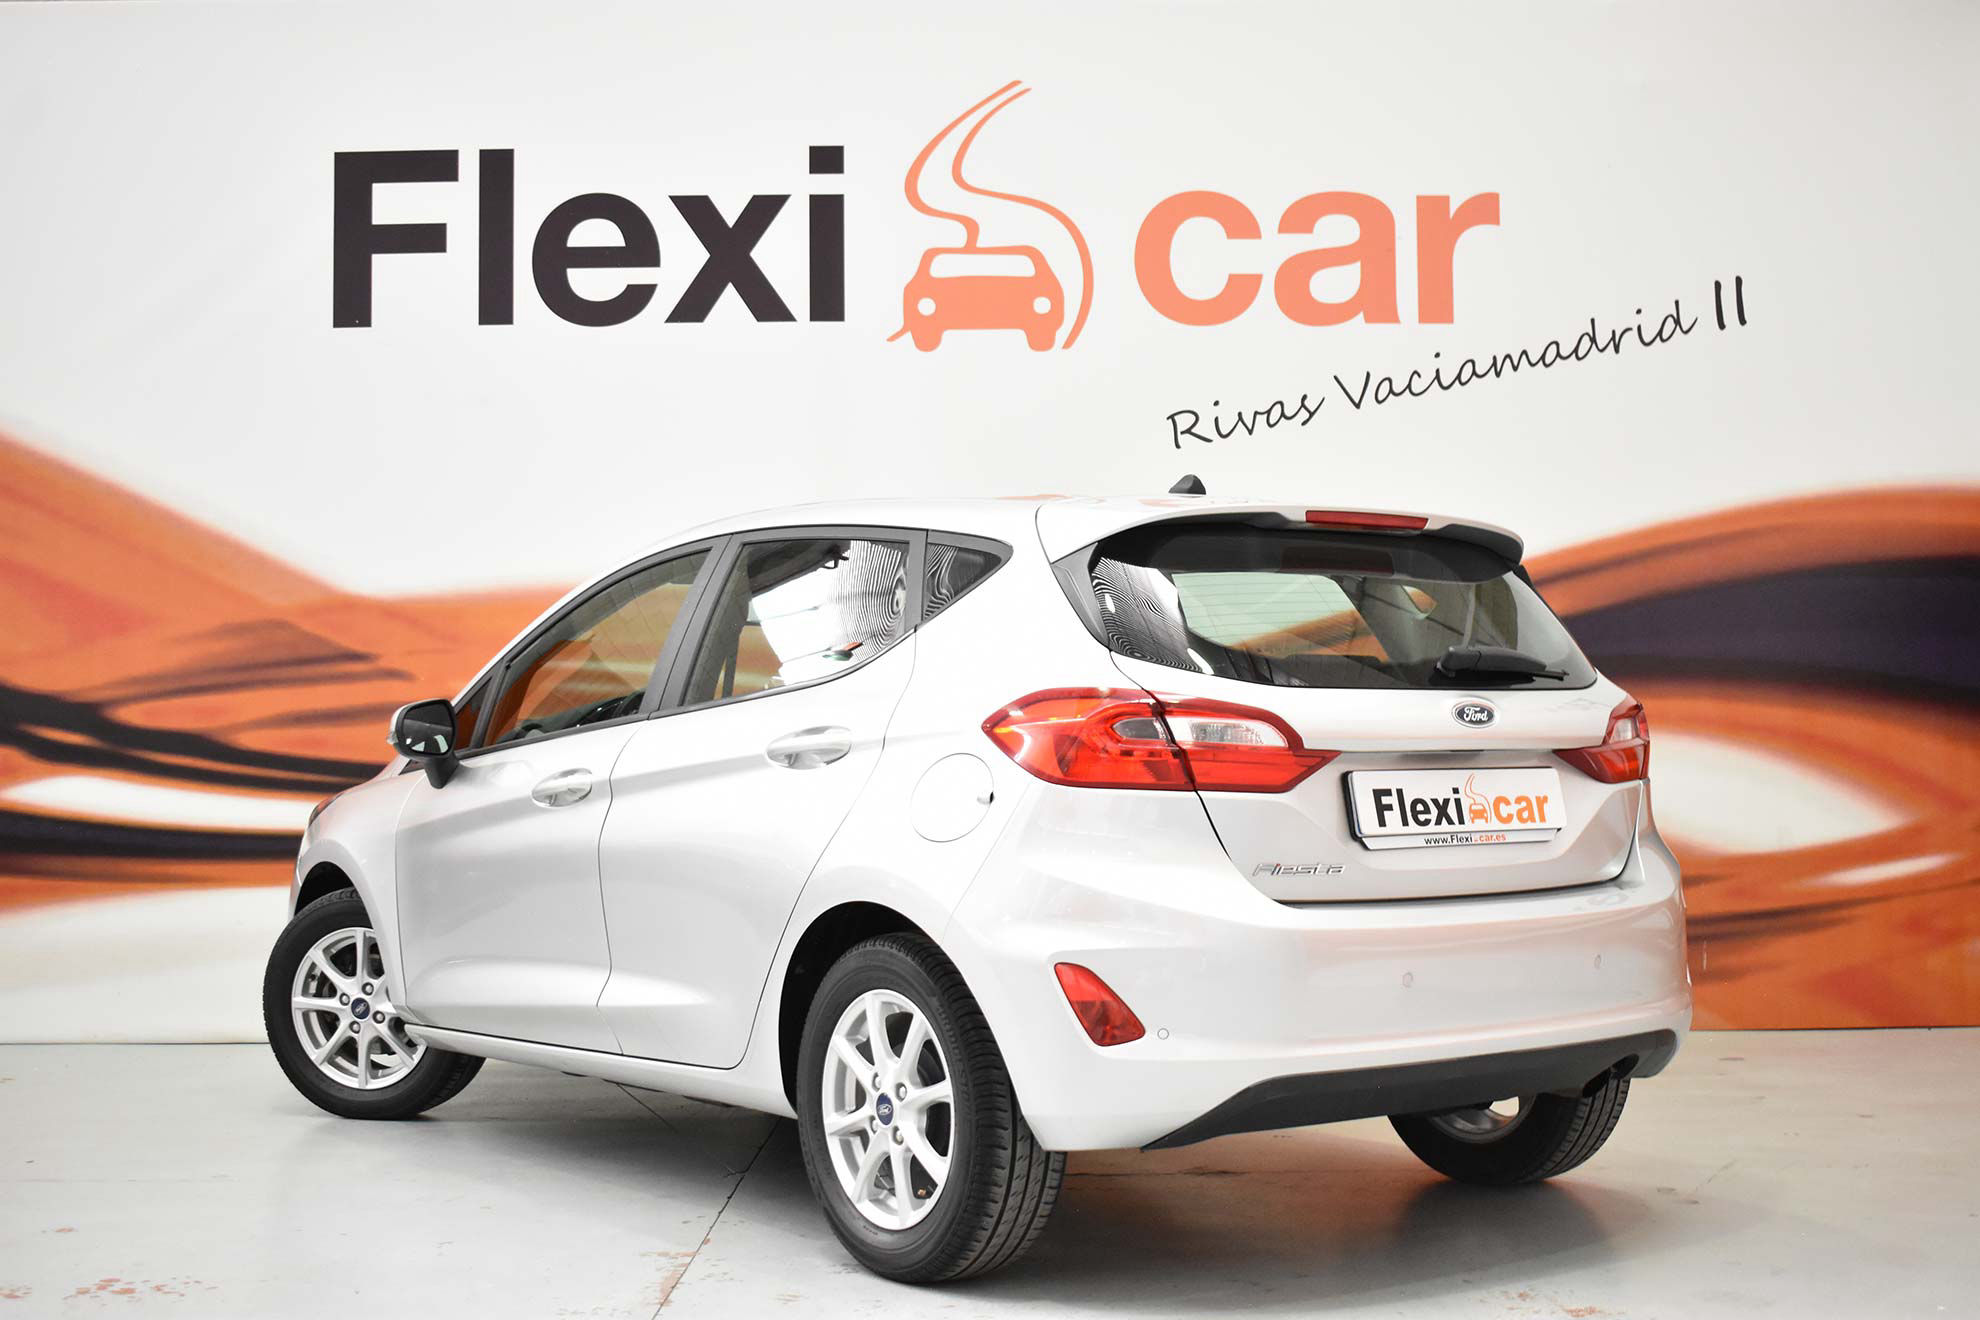 Ford Fiesta 1.1 Ti-VCT 63kW Trend+ 5p